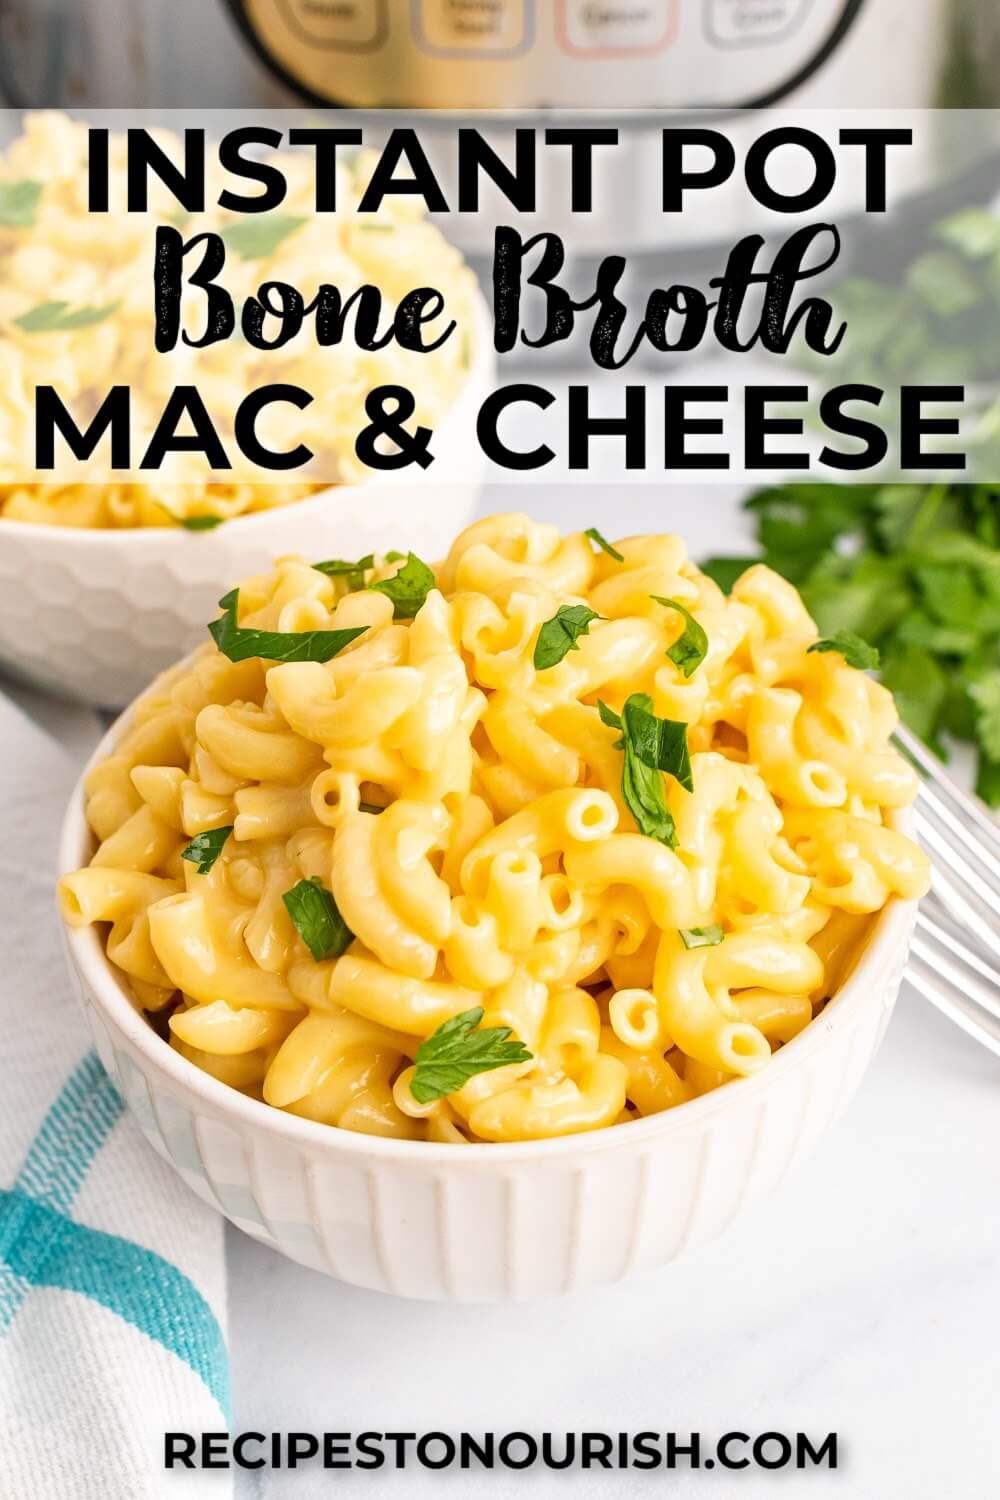 Two bowls full of homemade Mac and cheese, garnished with fresh parsley sitting next to two forks, fresh Italian parsley sprigs, a cloth kitchen towel and an Instant Pot and text that says Instant Pot Bone Broth Mac & Cheese RECIPESTONOURISH.COM